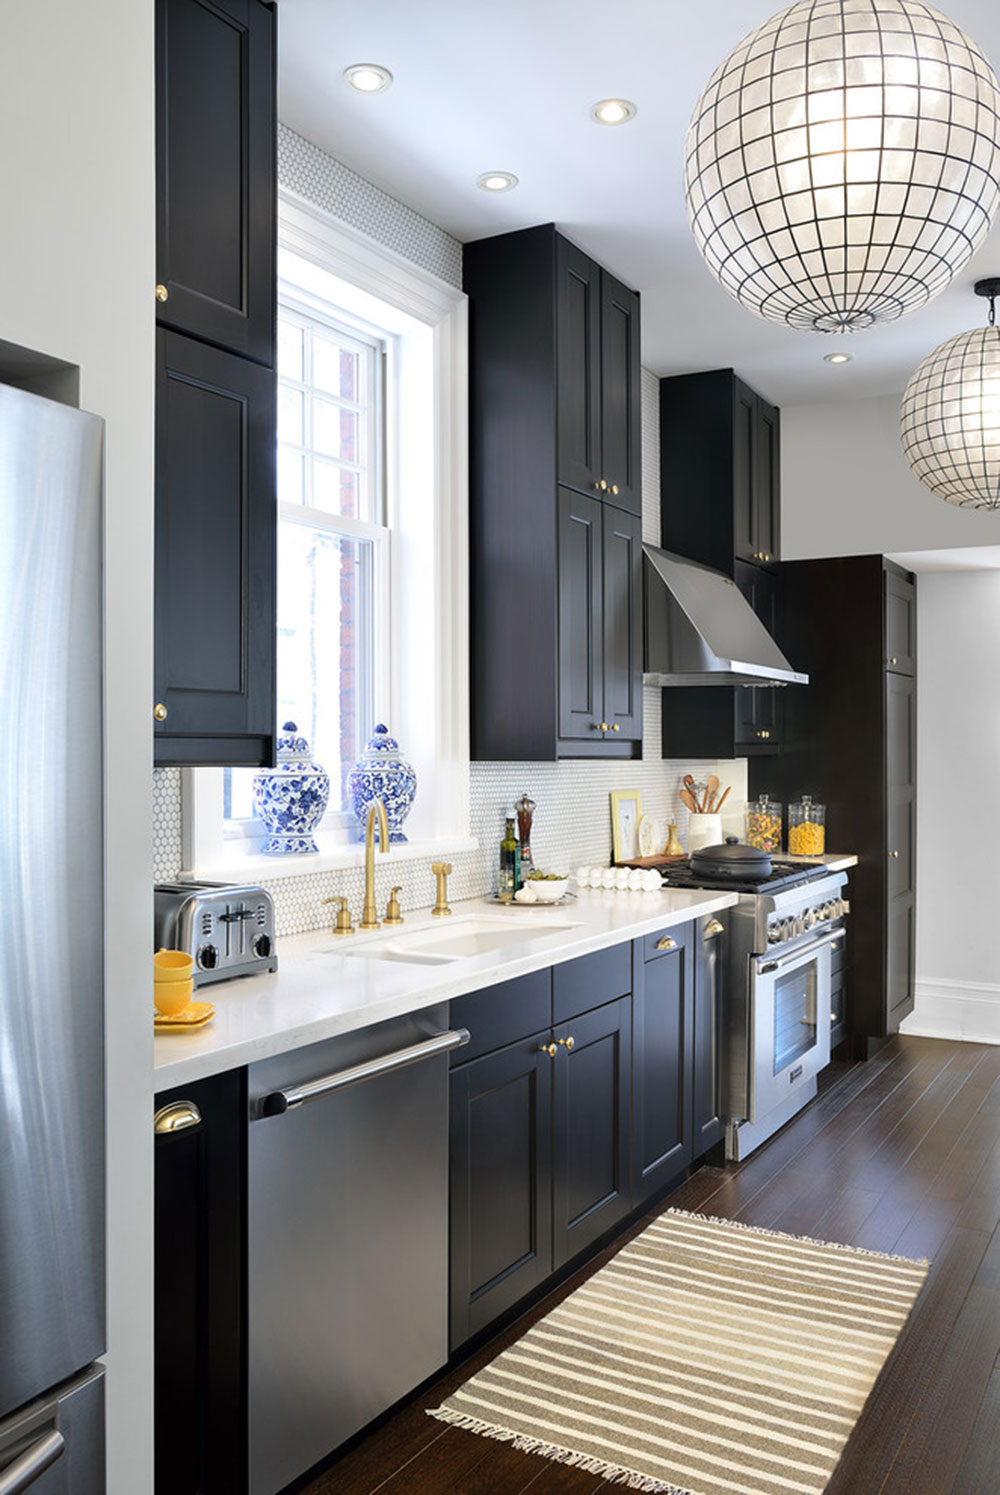 Kitchens-with-black-cupboards-can-still-be-bright10 Kitchens with-black cupboards - pictures and ideas